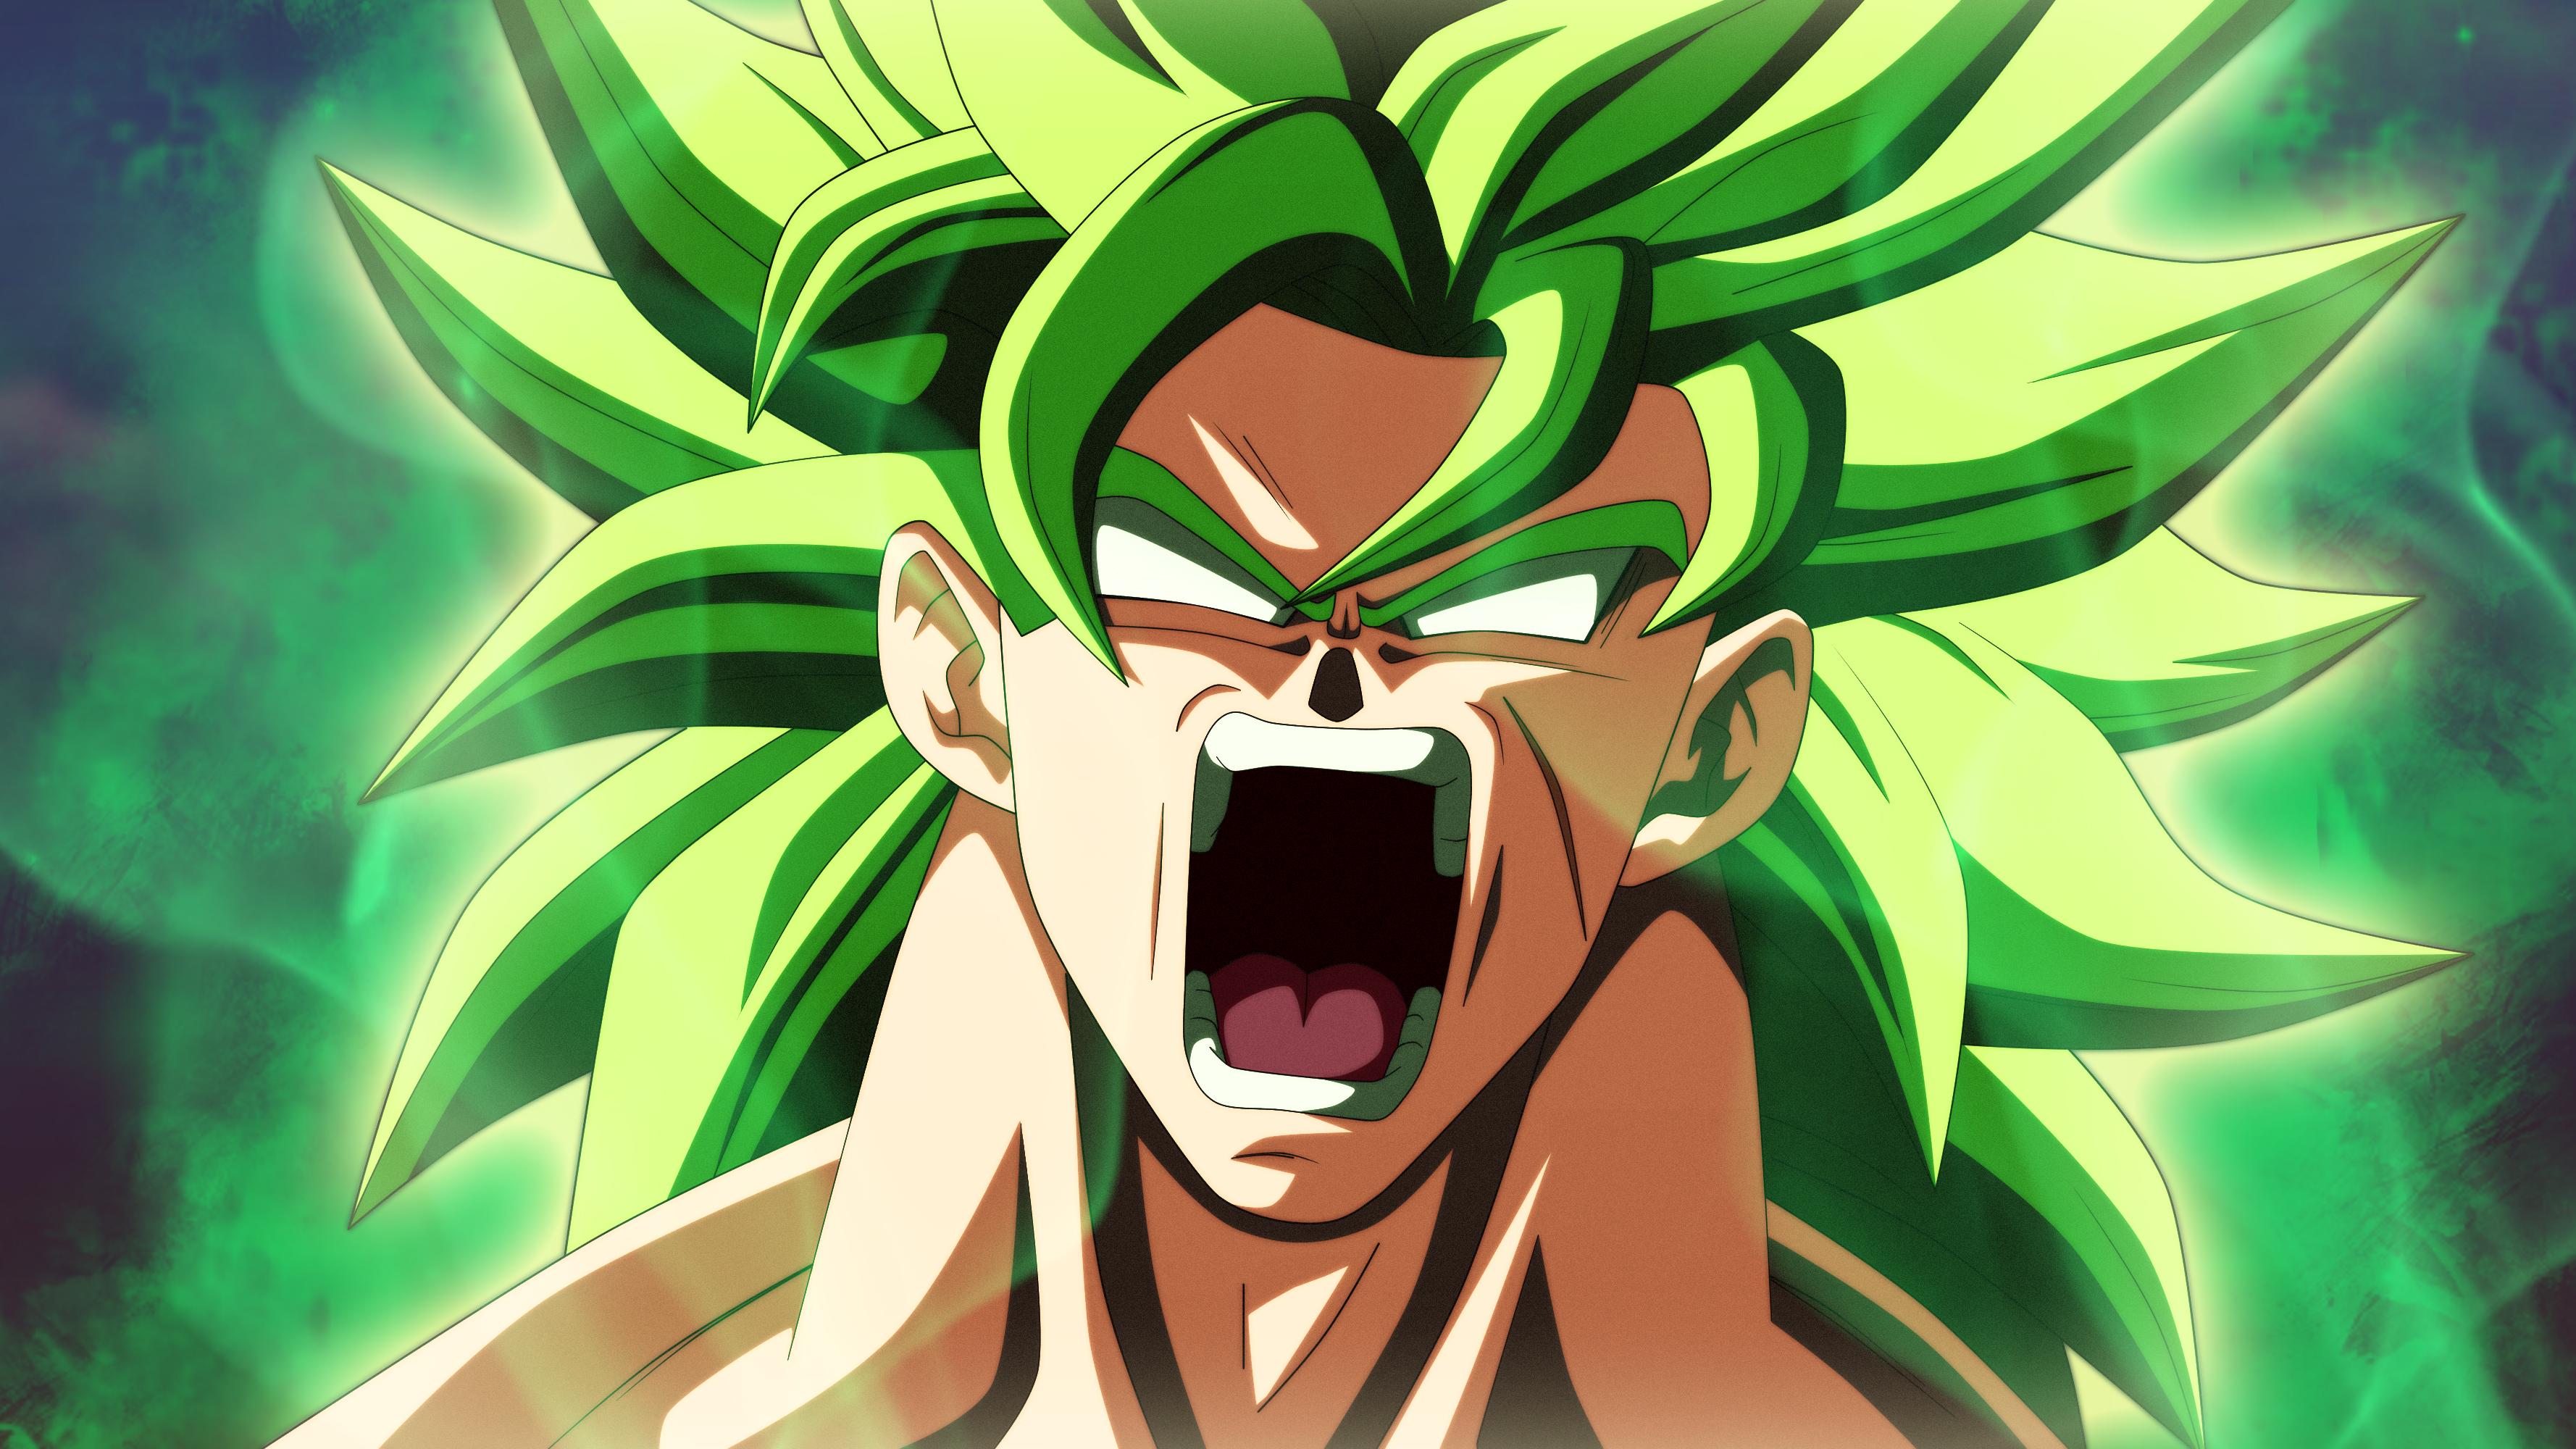 3556 x 2000 · jpeg - Dragon Ball Super: Broly Wallpapers, Pictures, Images